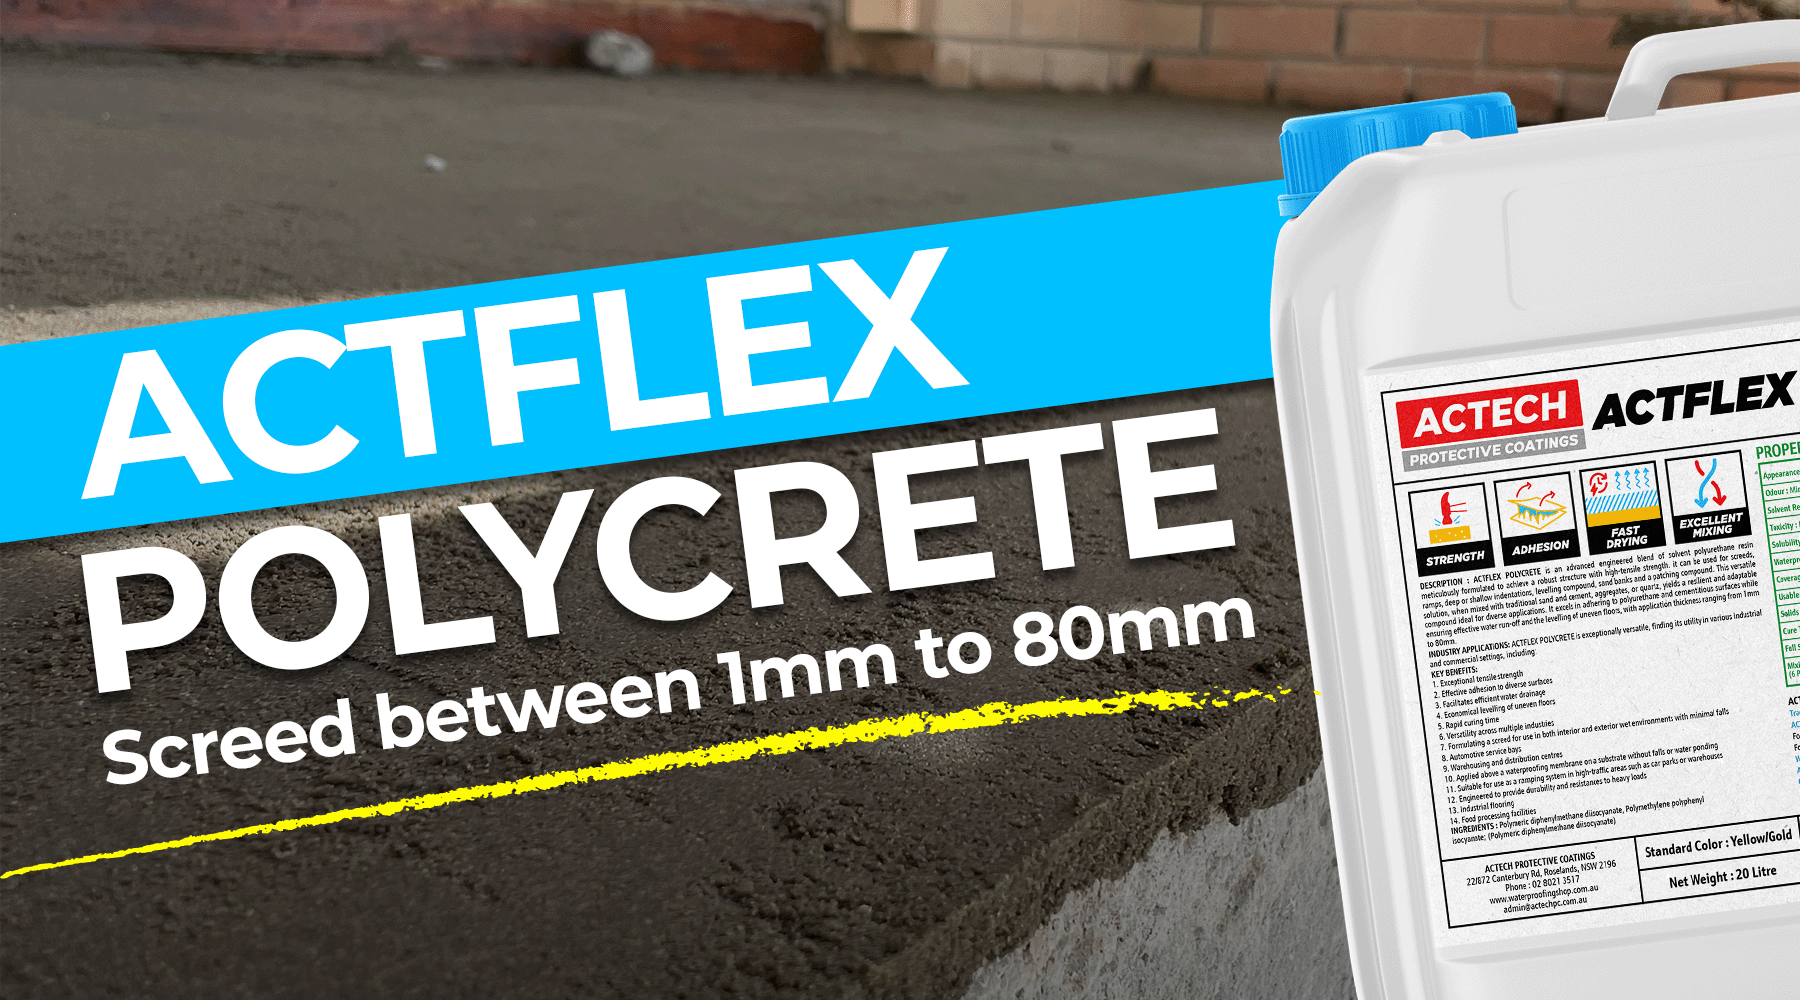 ACTFLEX POLYCRETE: Your Ultimate Screed Solution